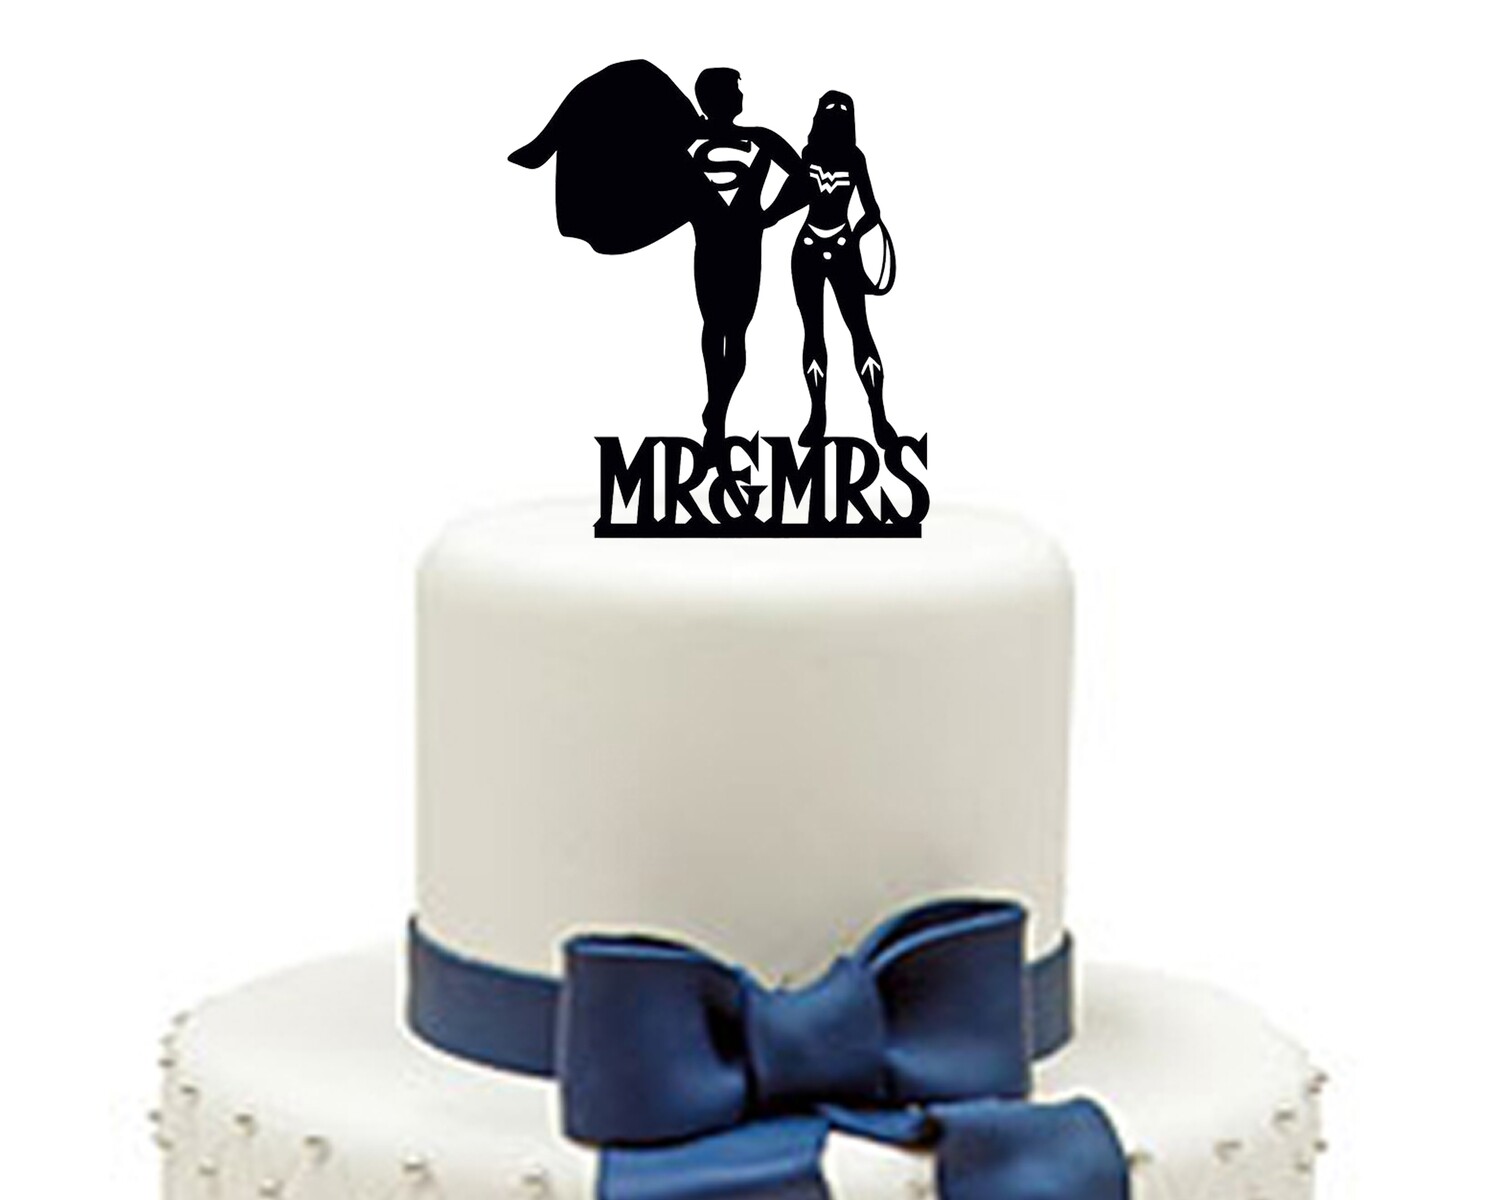 Personalized Wedding Cake topper mr and mrs, superman wedding cake decoration. disney wedding cake topper, custom cake topper Cake Topper